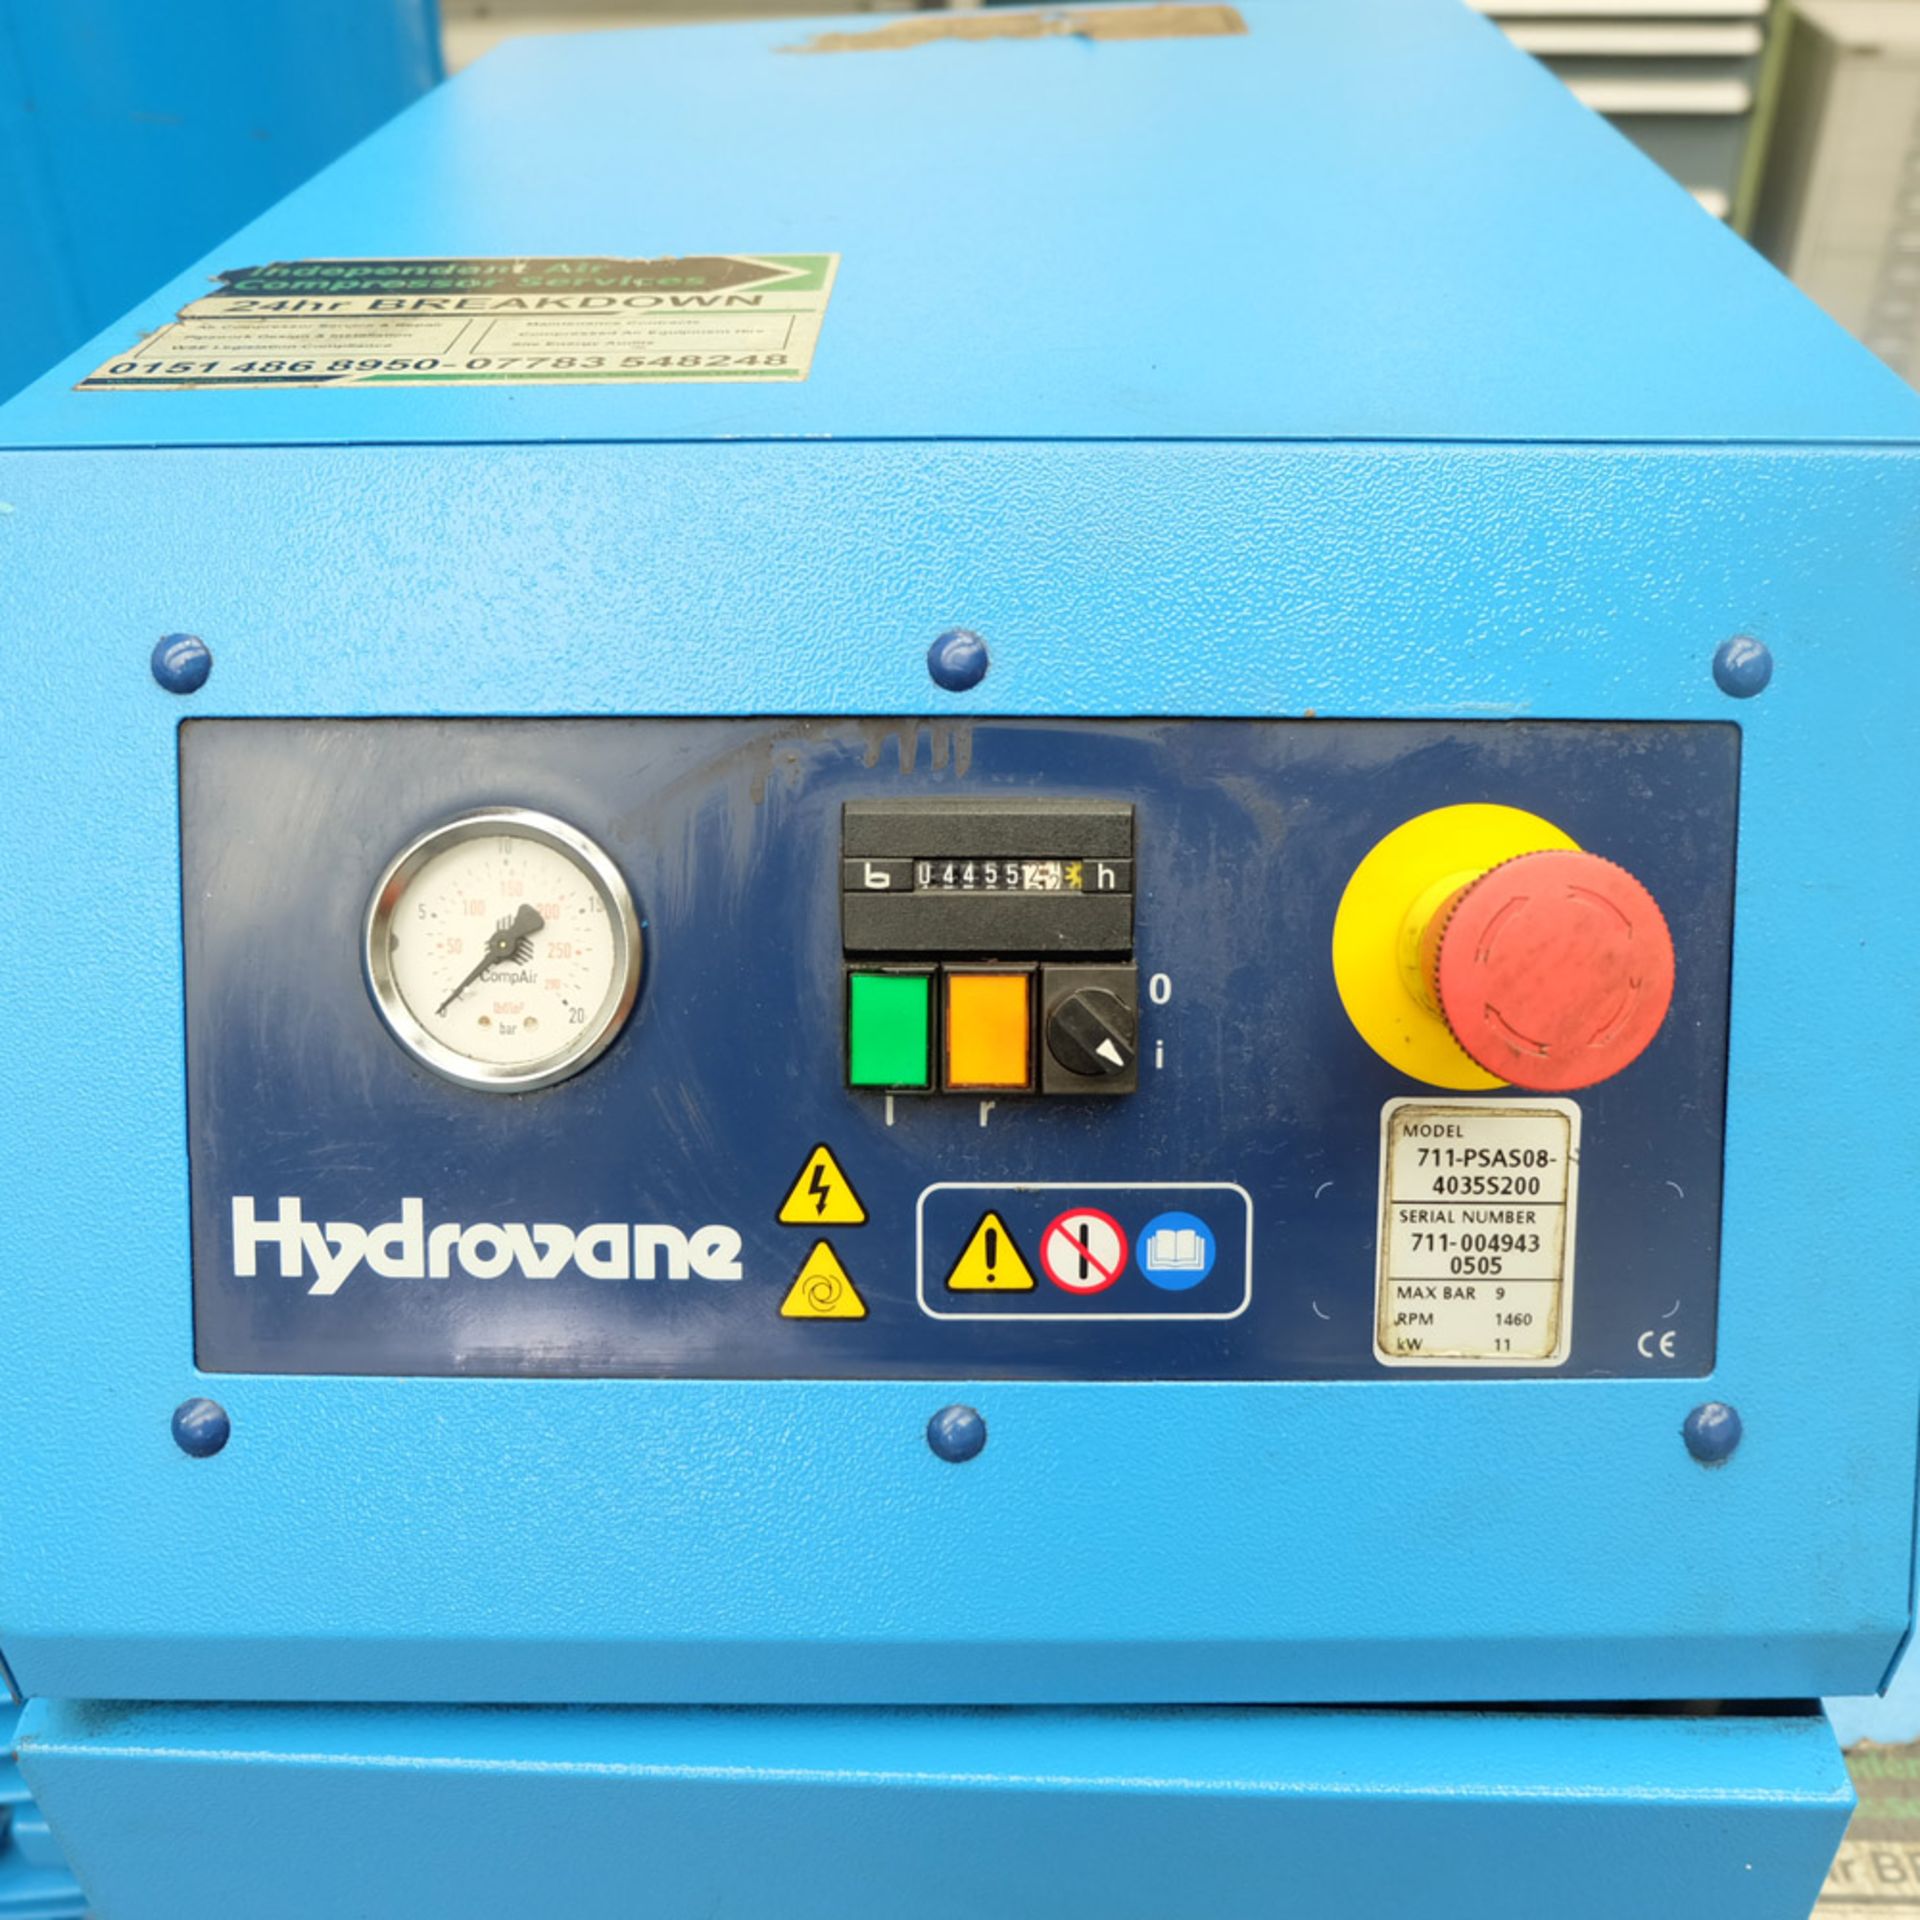 A HYDROVANE Type HV11 Model 711-PSAS08-4035S200 Rotary Air Compressor: Max BAR 9, Motor 11kW, Flow - Image 3 of 7